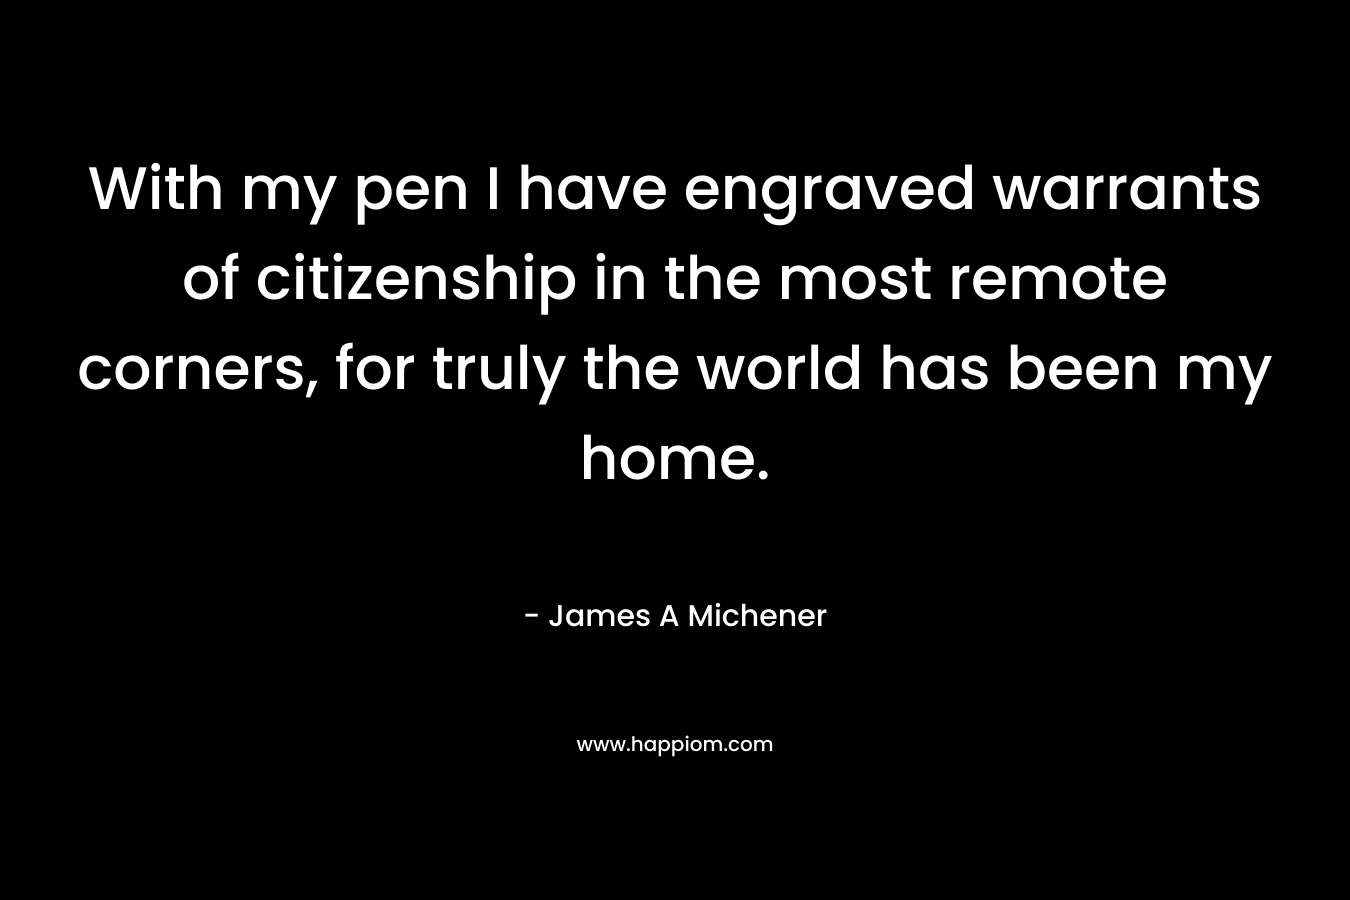 With my pen I have engraved warrants of citizenship in the most remote corners, for truly the world has been my home. – James A Michener